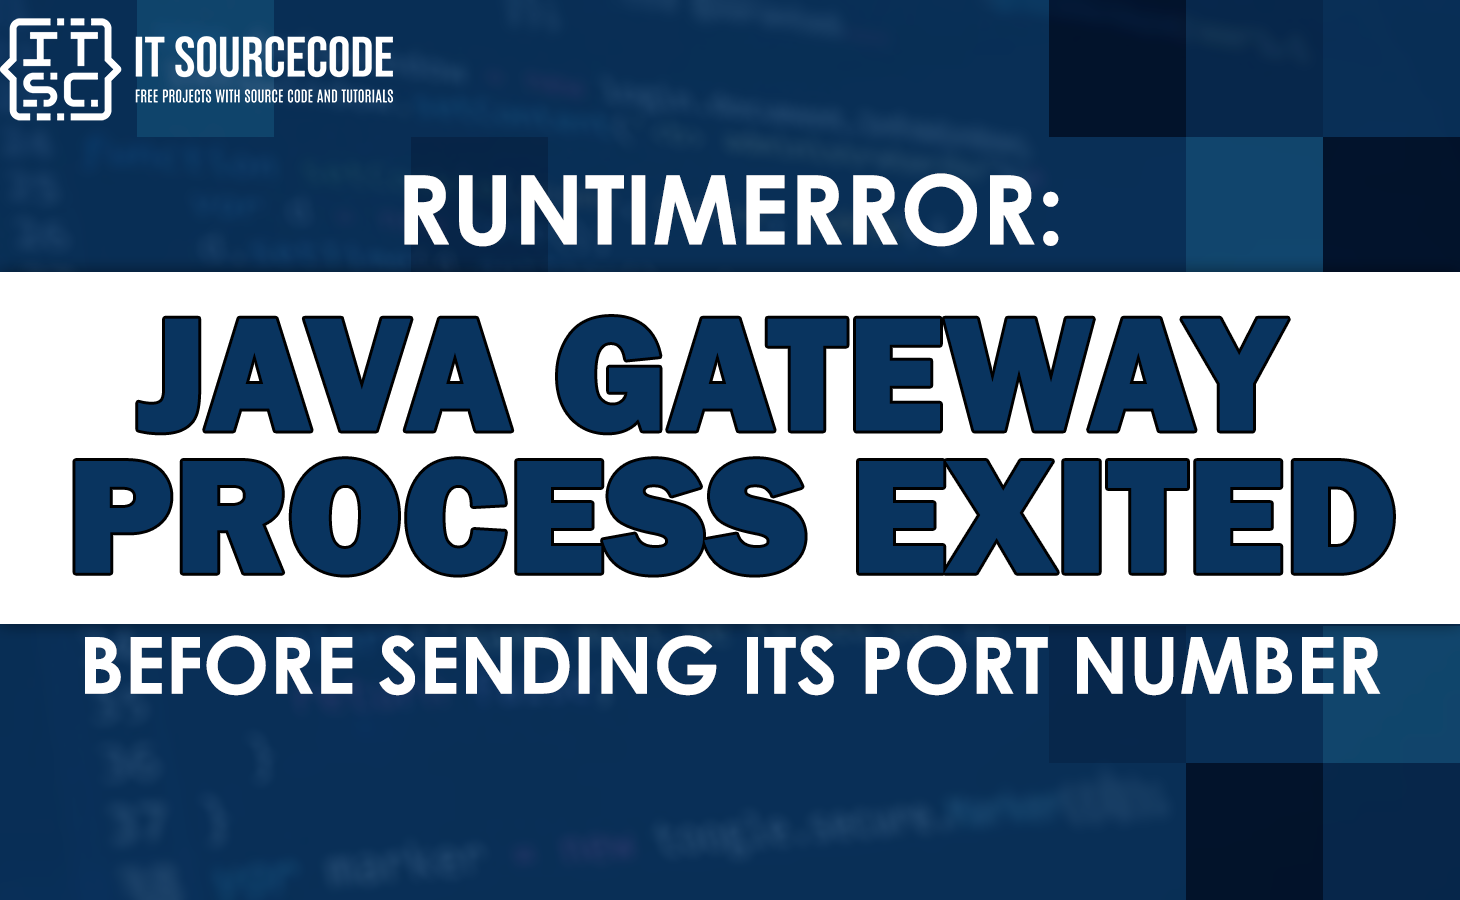 Java gateway process exited before sending its port number